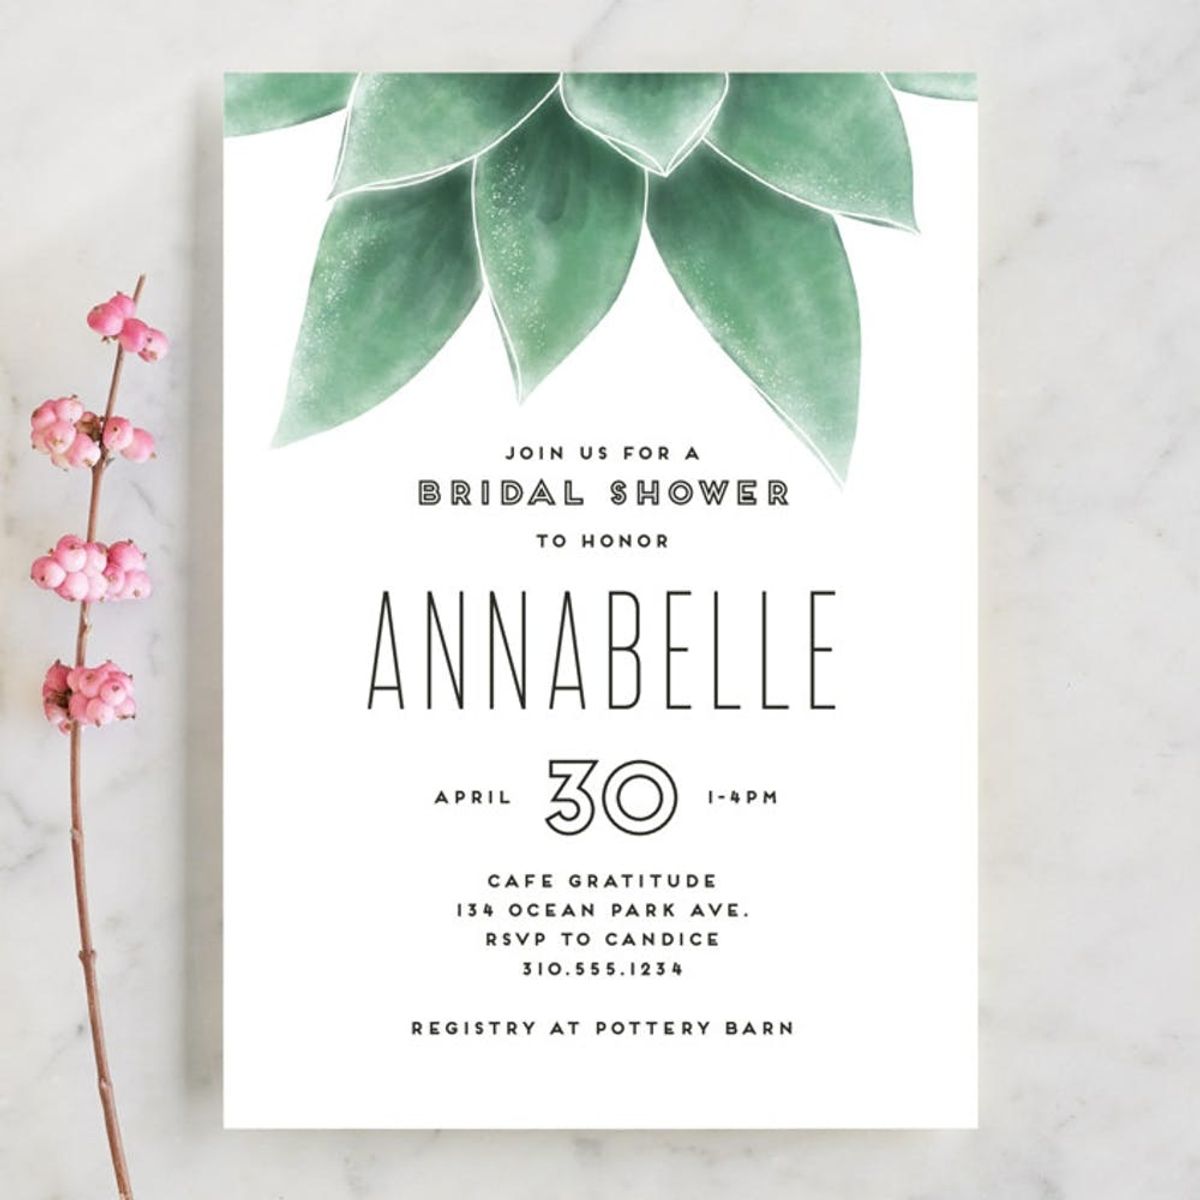 10 Bridal Shower Invitations to Get Any Party Started